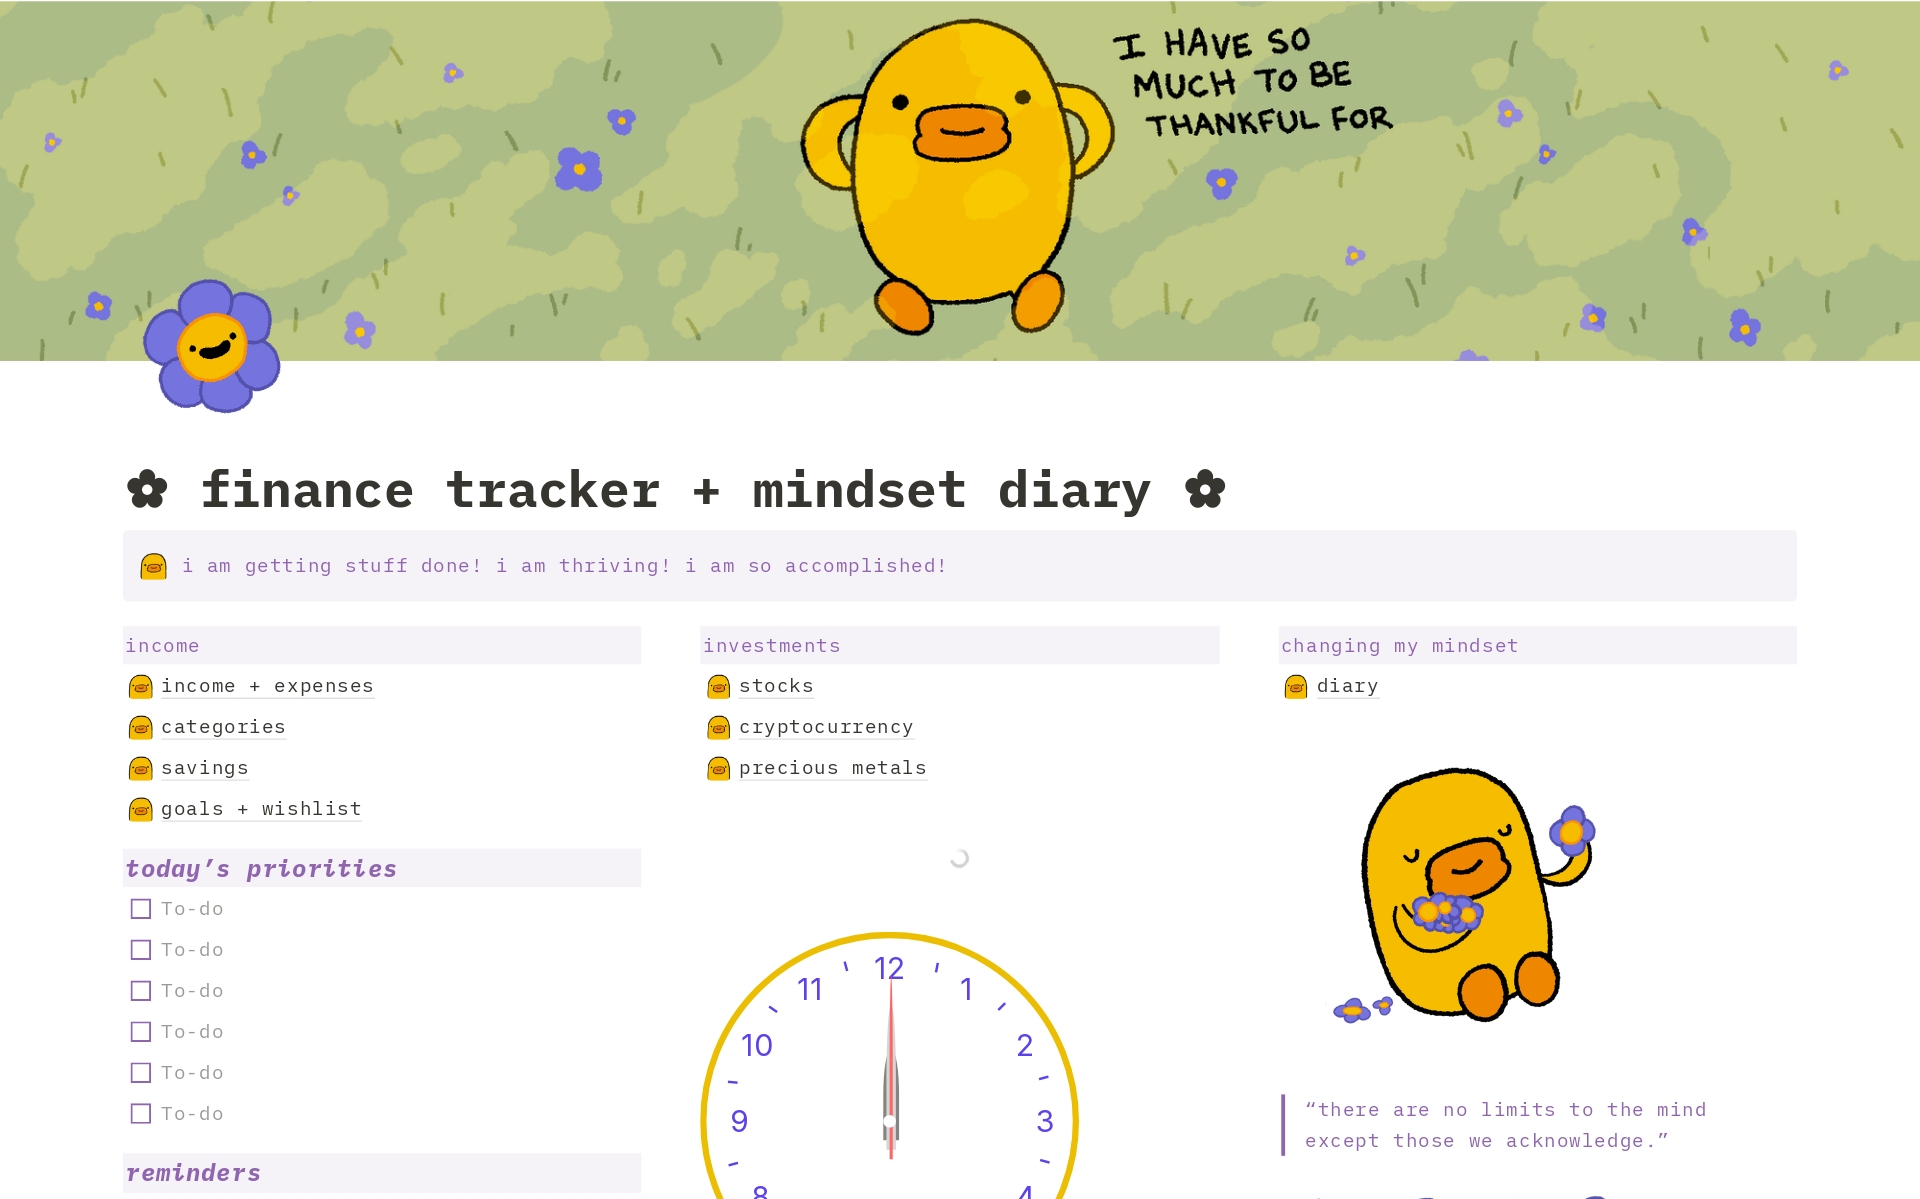 Manage income & expenses, savings & goals, stocks, precious metals, crypto, and more—in my all-in-one "Ducky Delight" finance tracker dashboard! 🦆 With a mindset diary, to-do list, quotes, calendar, and clock, it's your cutest companion for financial success.